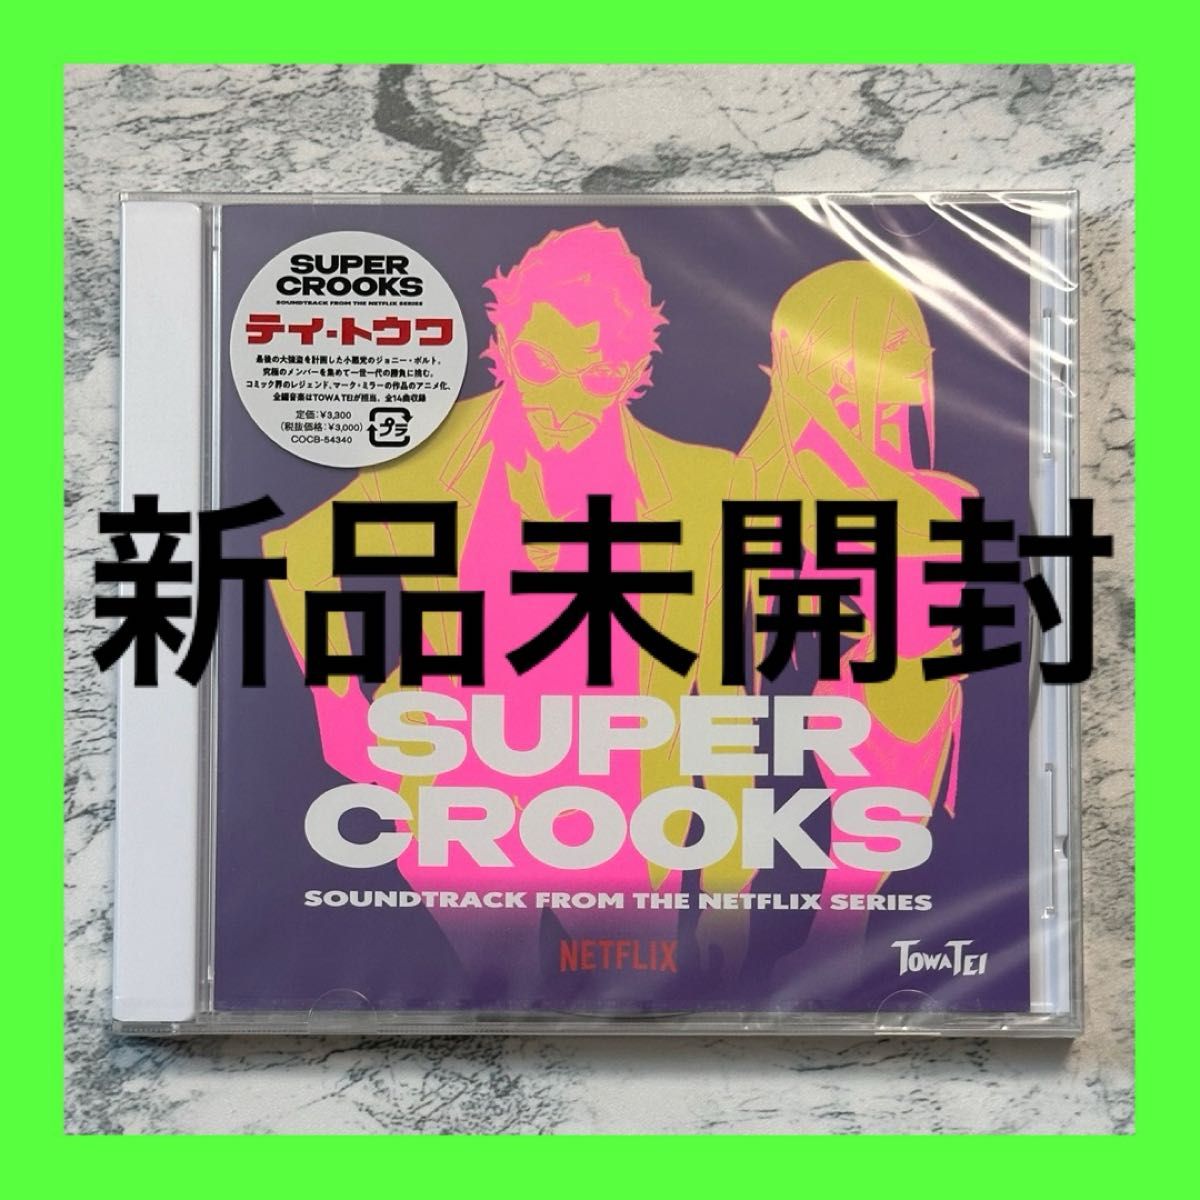 「SUPER CROOKS SOUNDTRACK FROM THE NETFLIX SERIES」テイ・トウワ